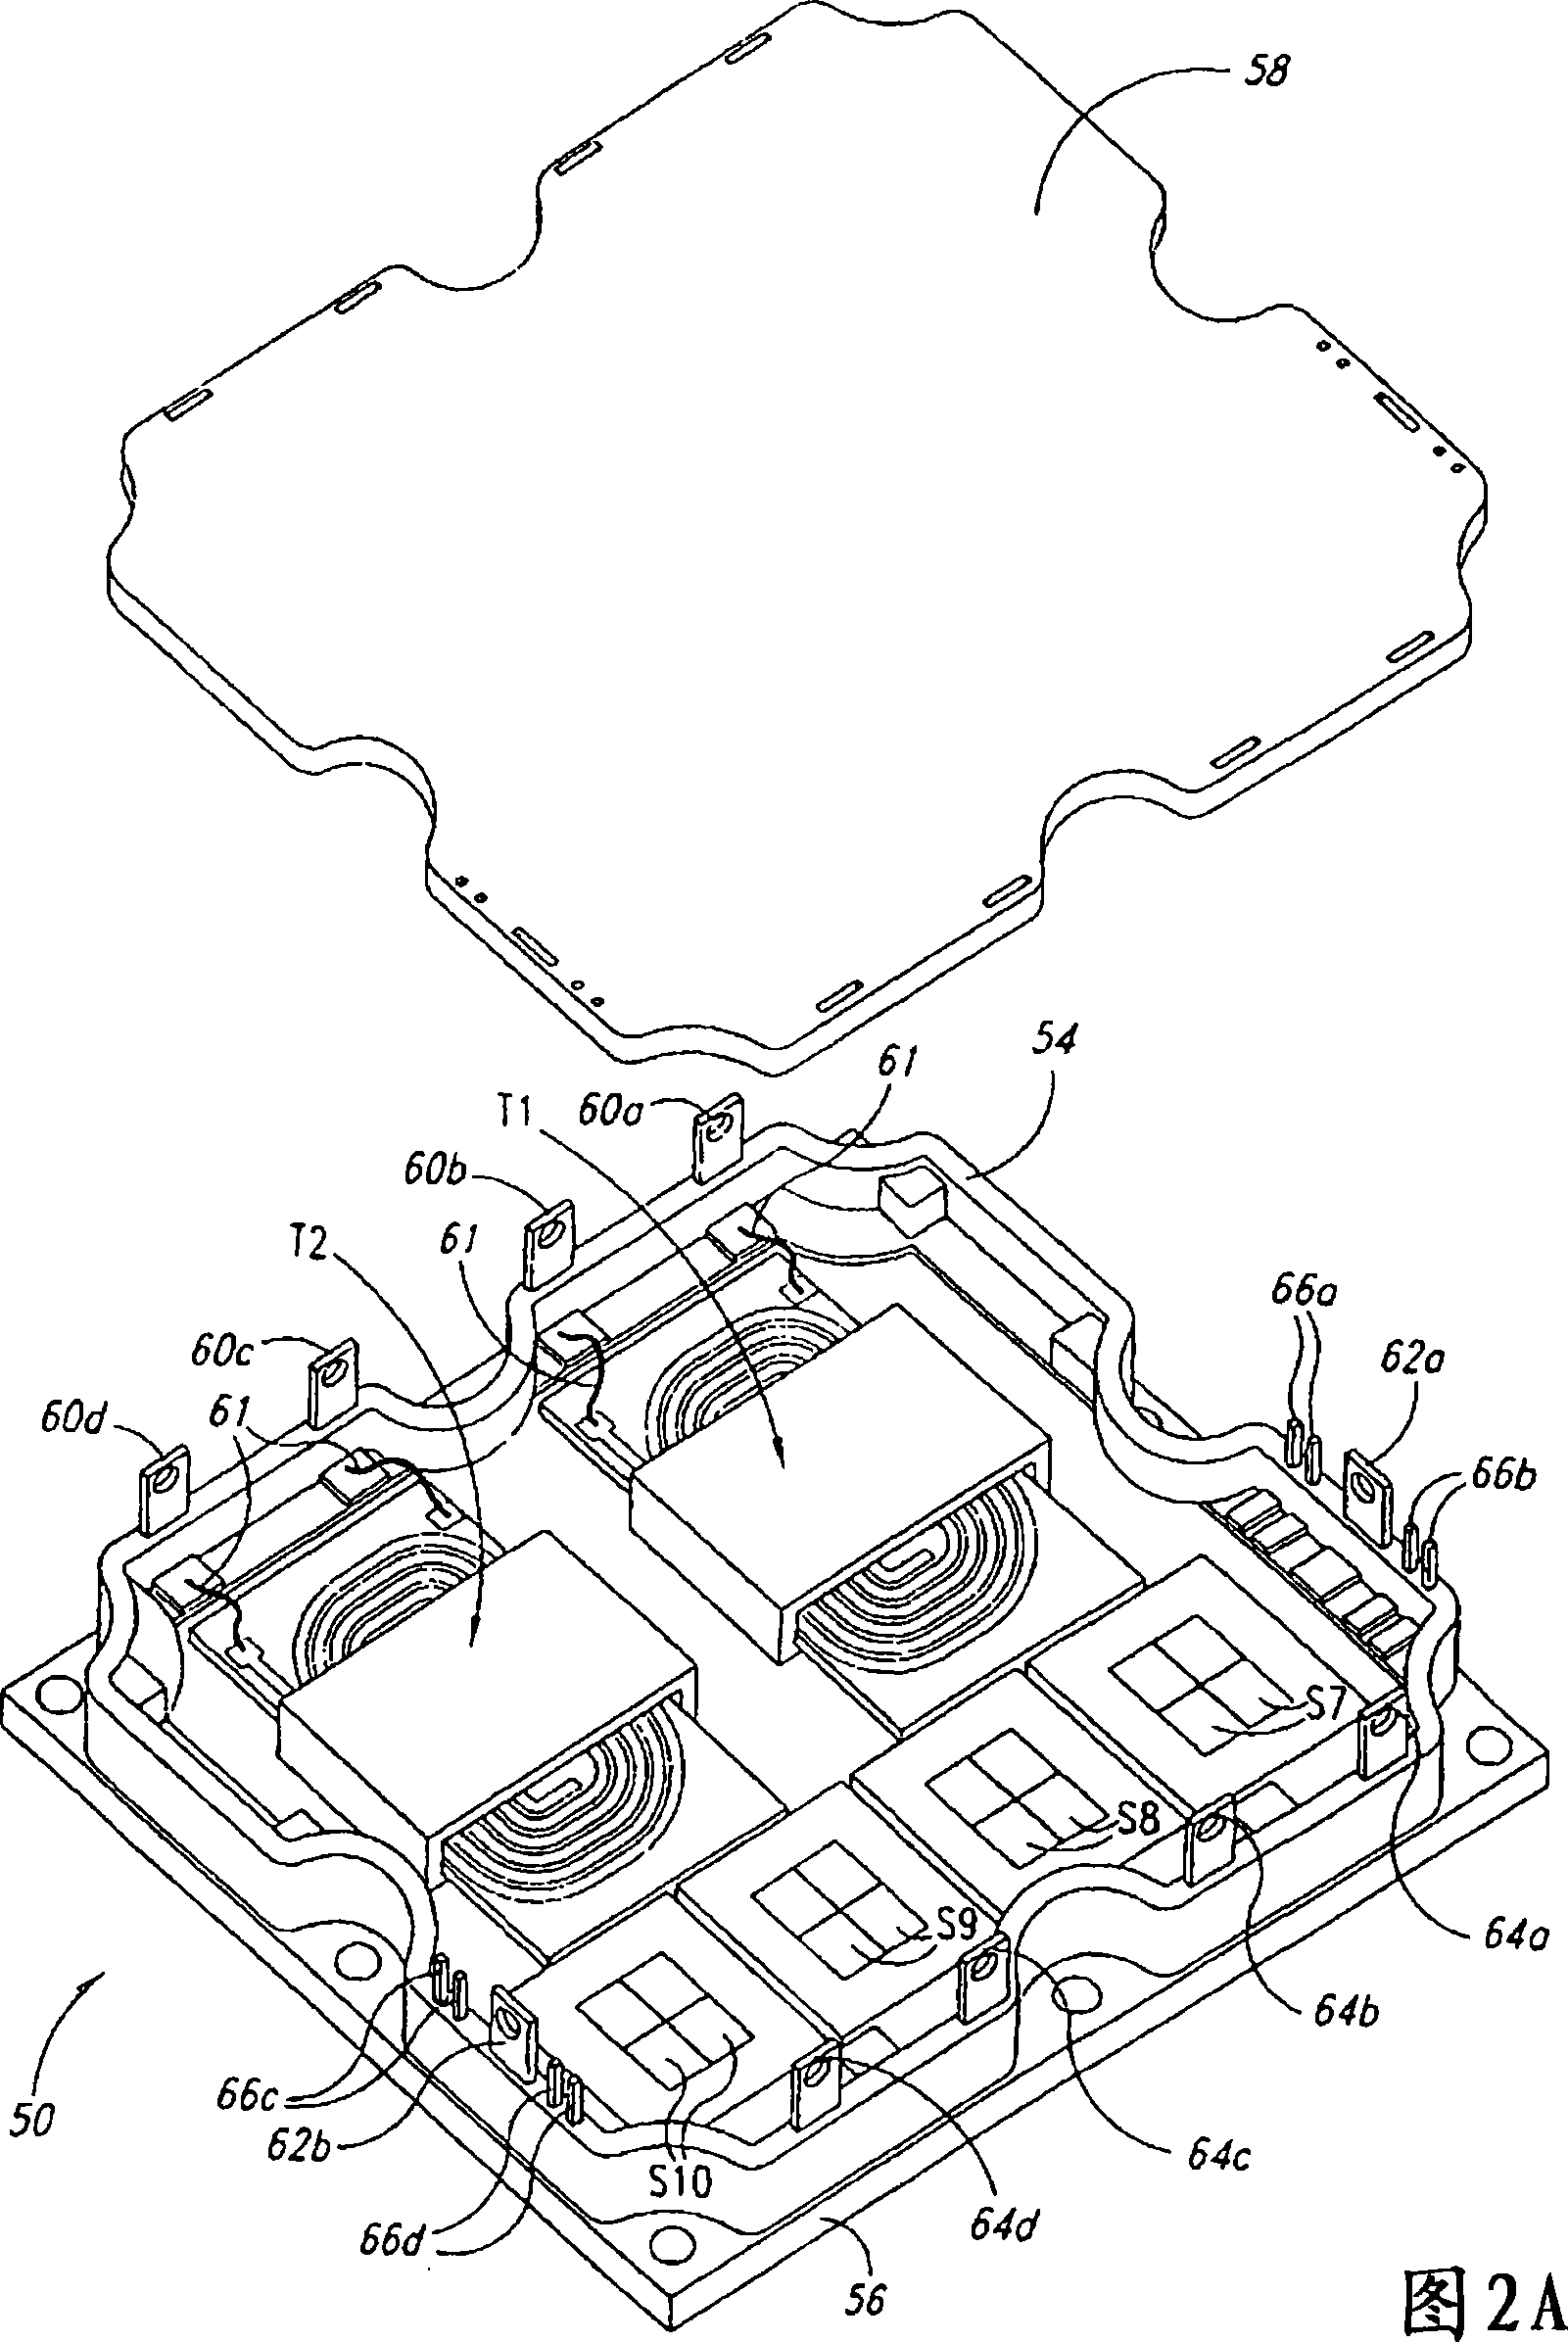 Integration of planar transformer and/or planar inductor with power switches in power converter